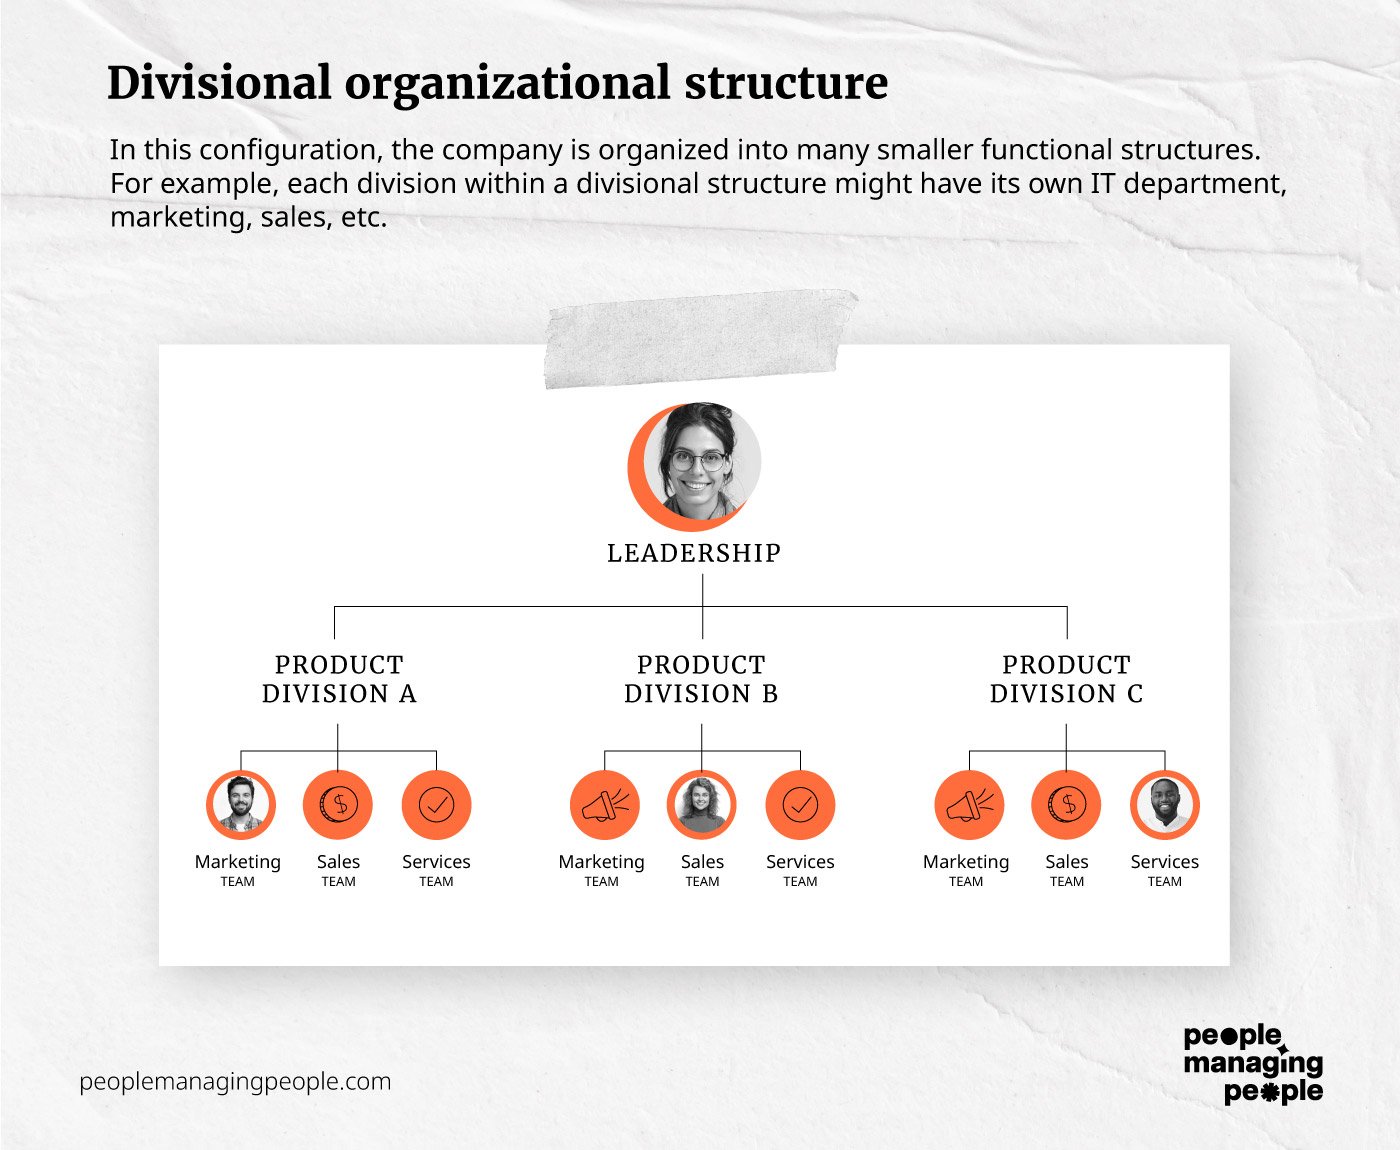 divisional org structure infographic